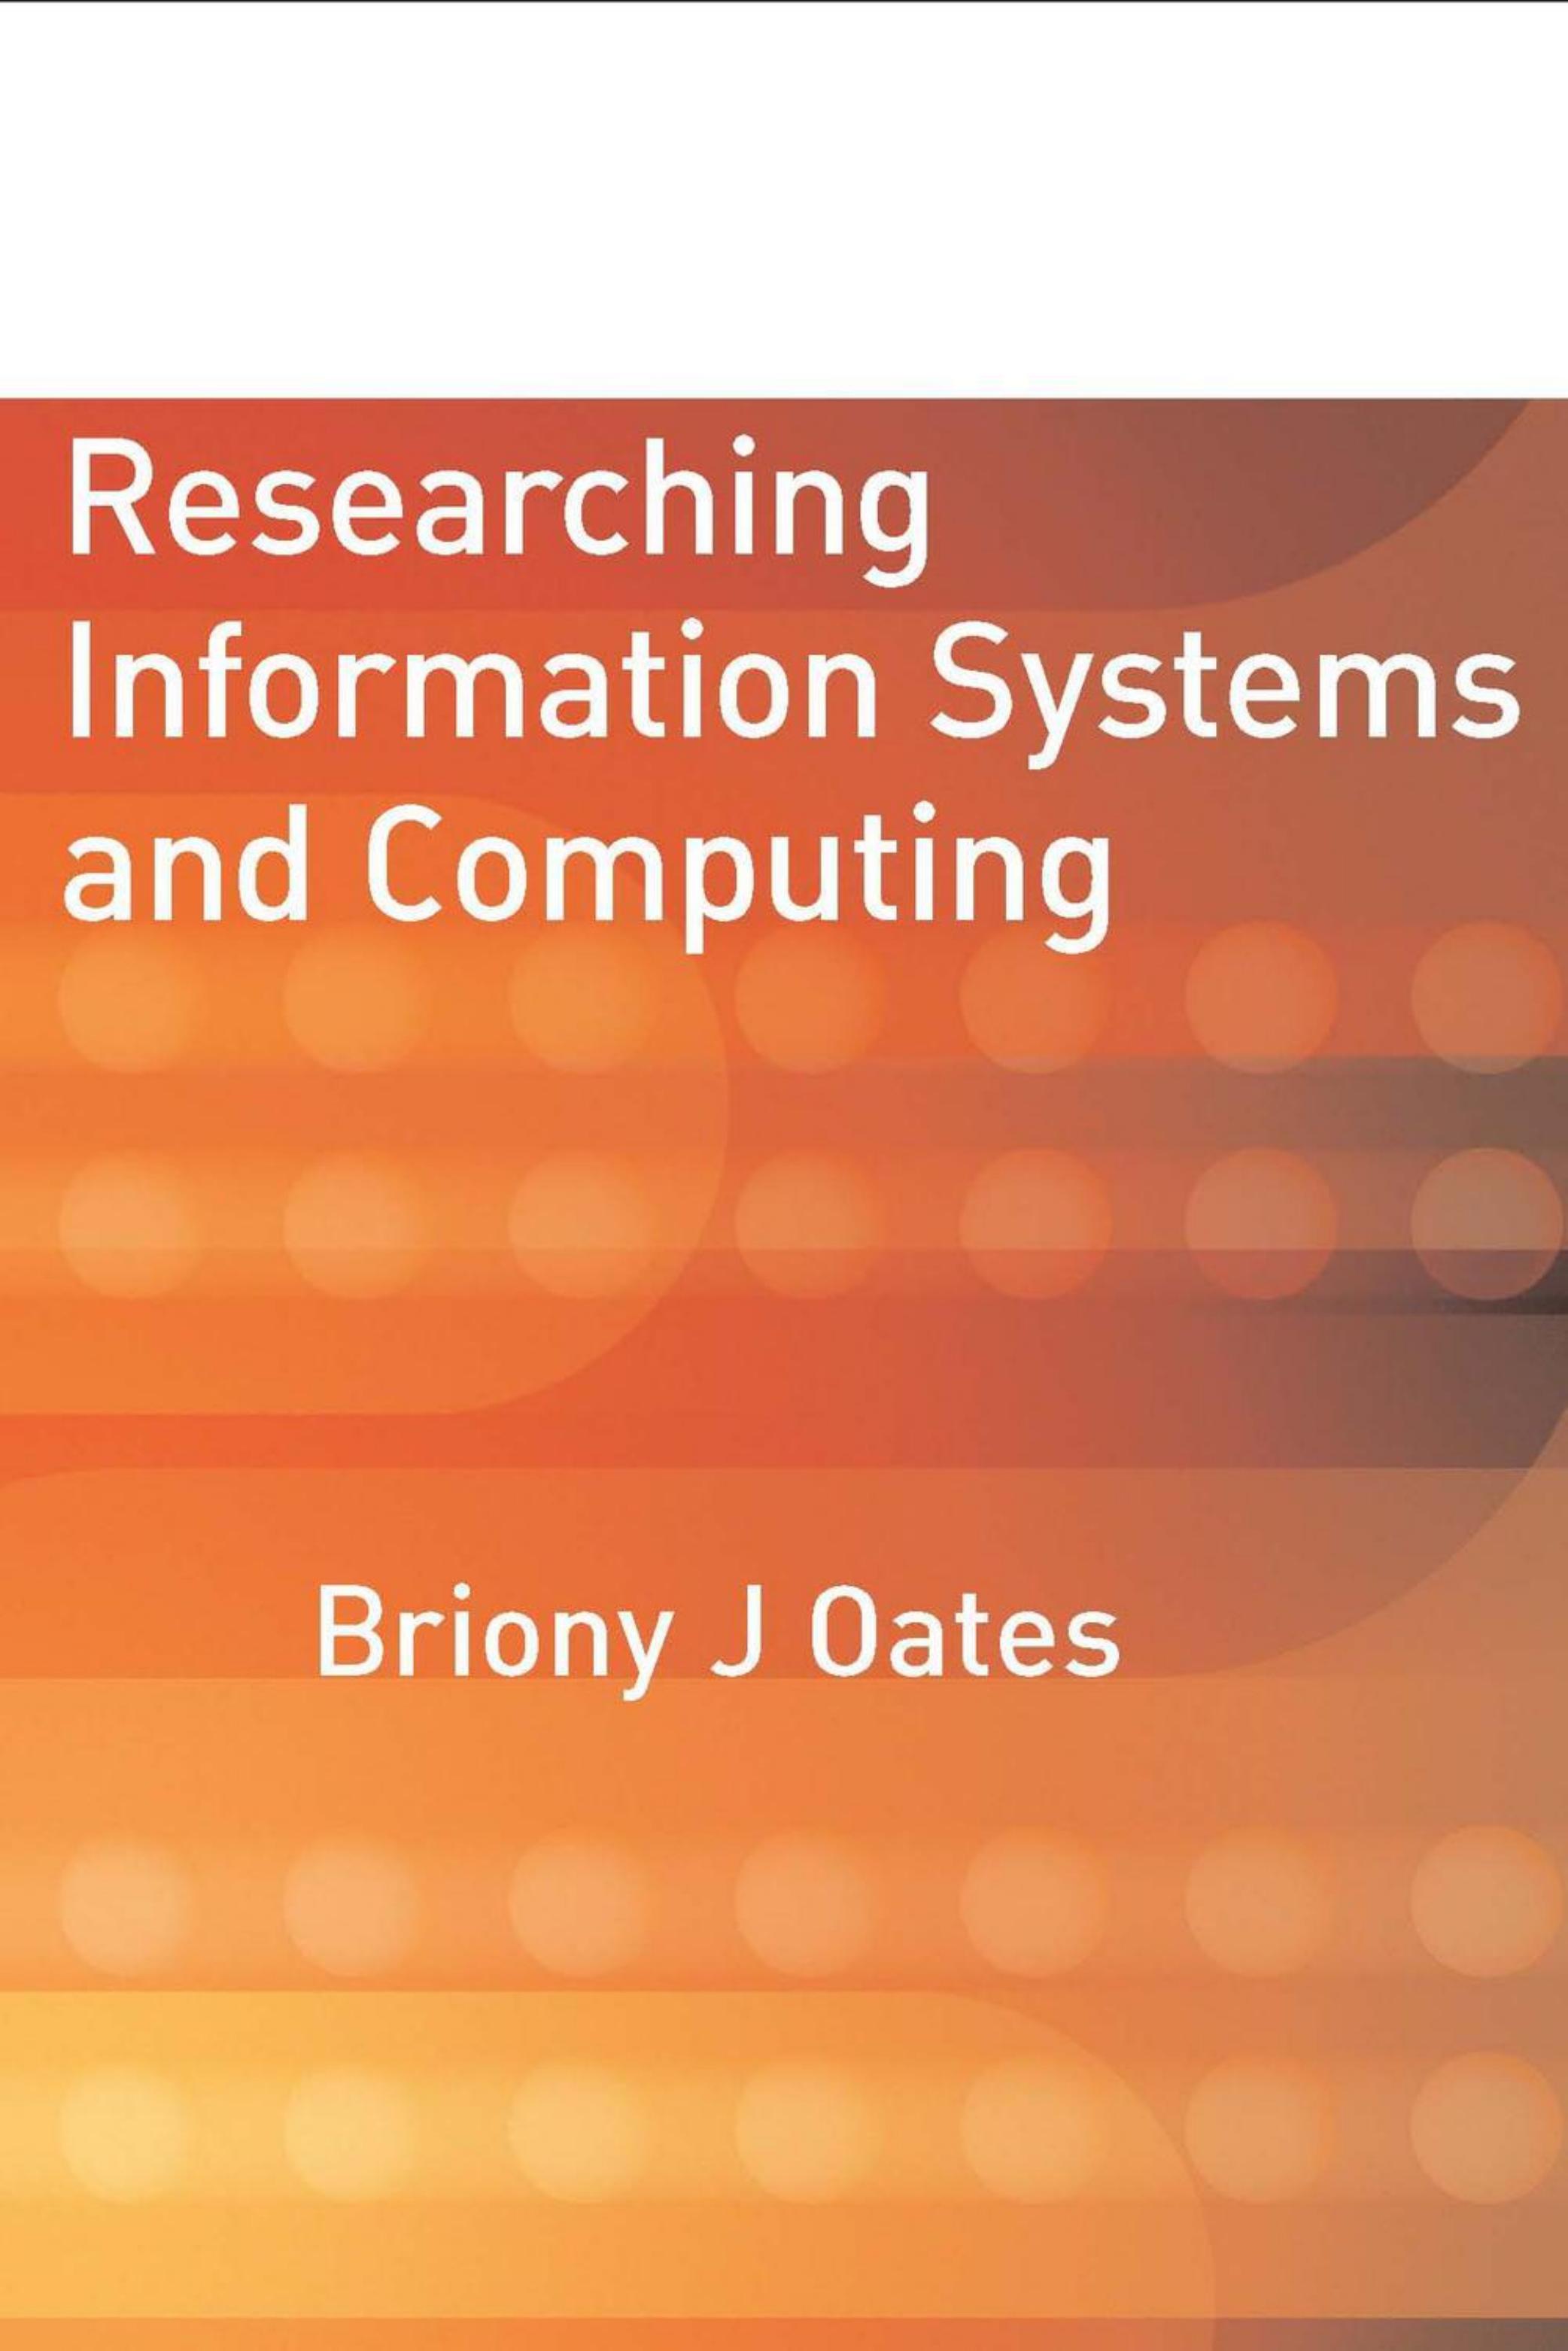 Researching Information Systems and Computing by Briony J Oates